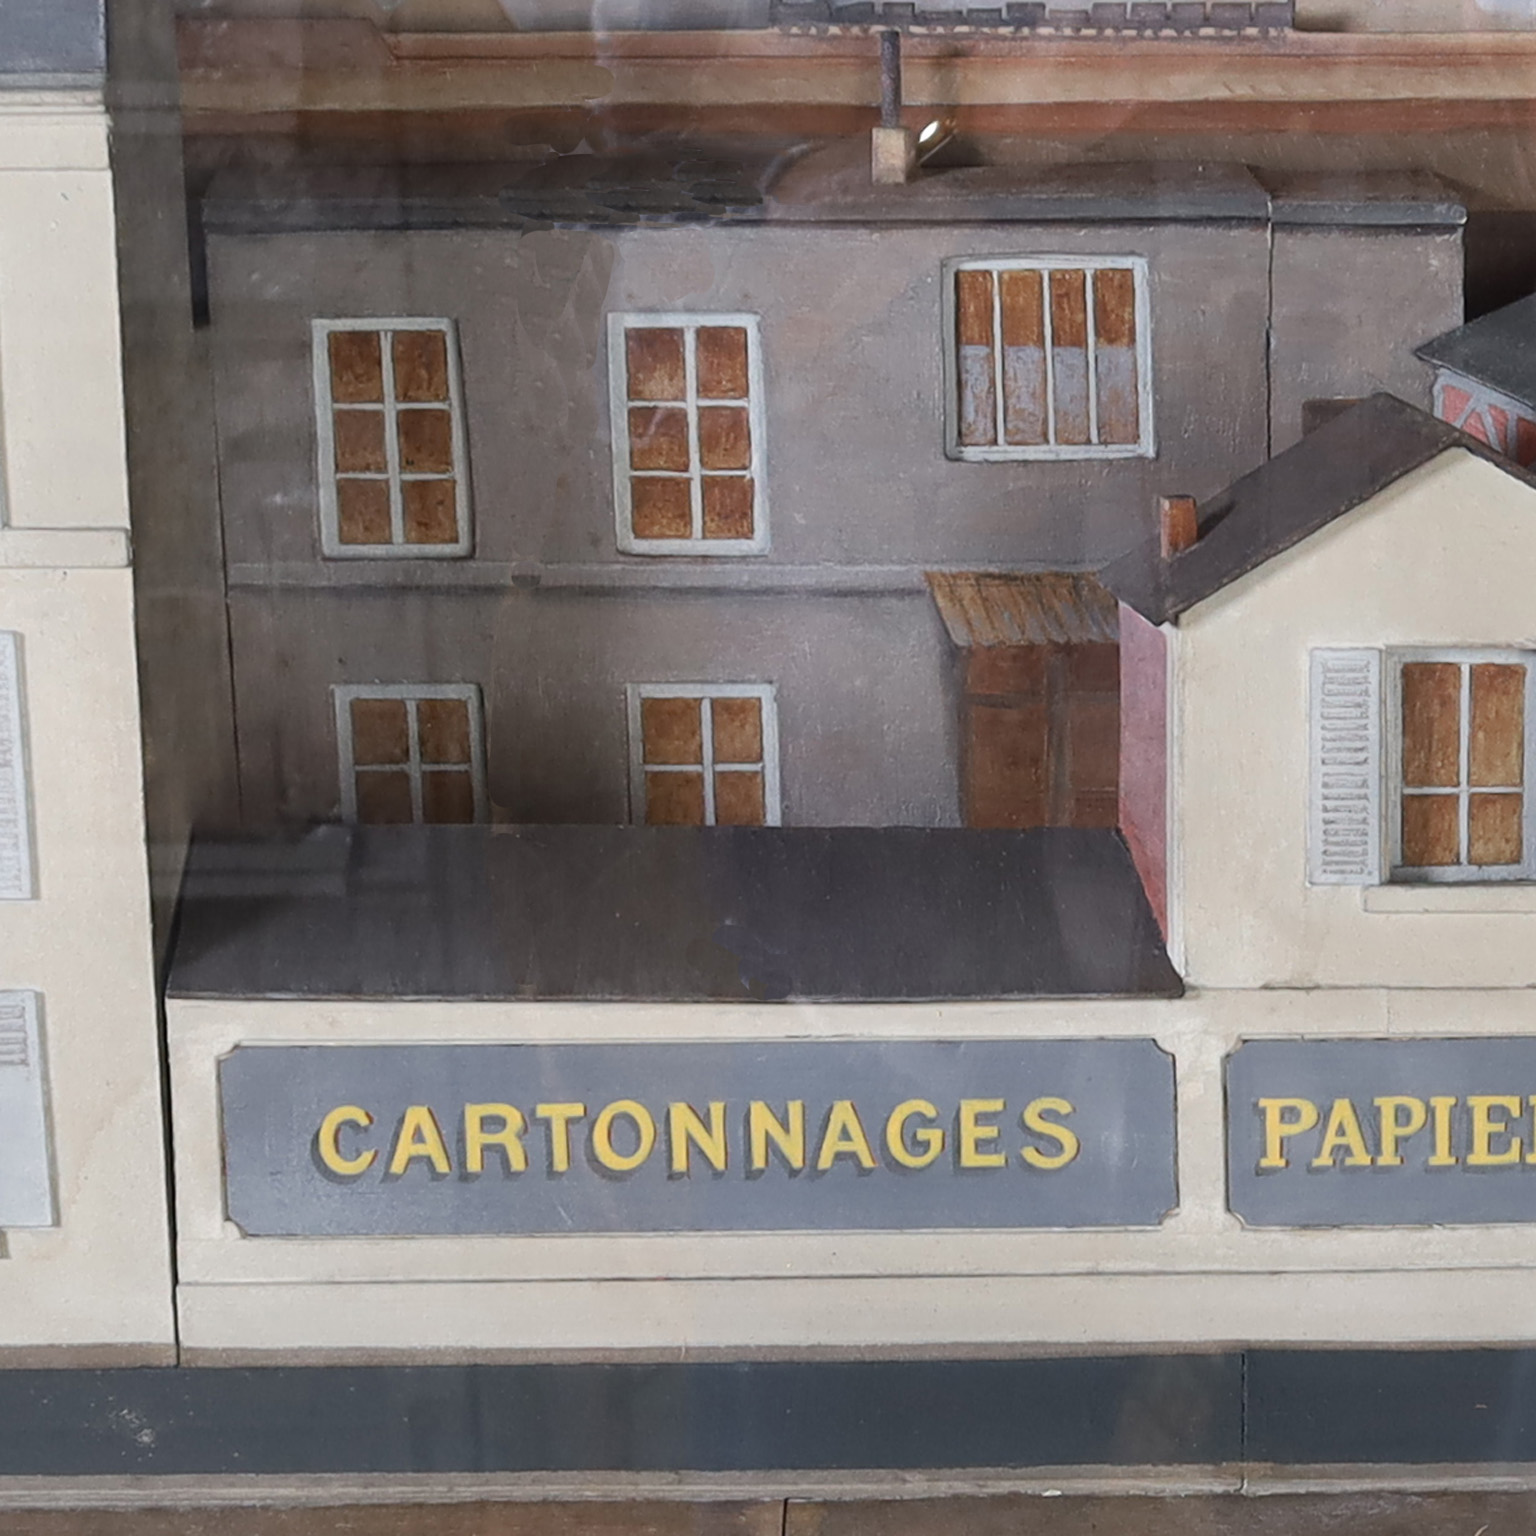 Antique Architectural Diorama of a French Street